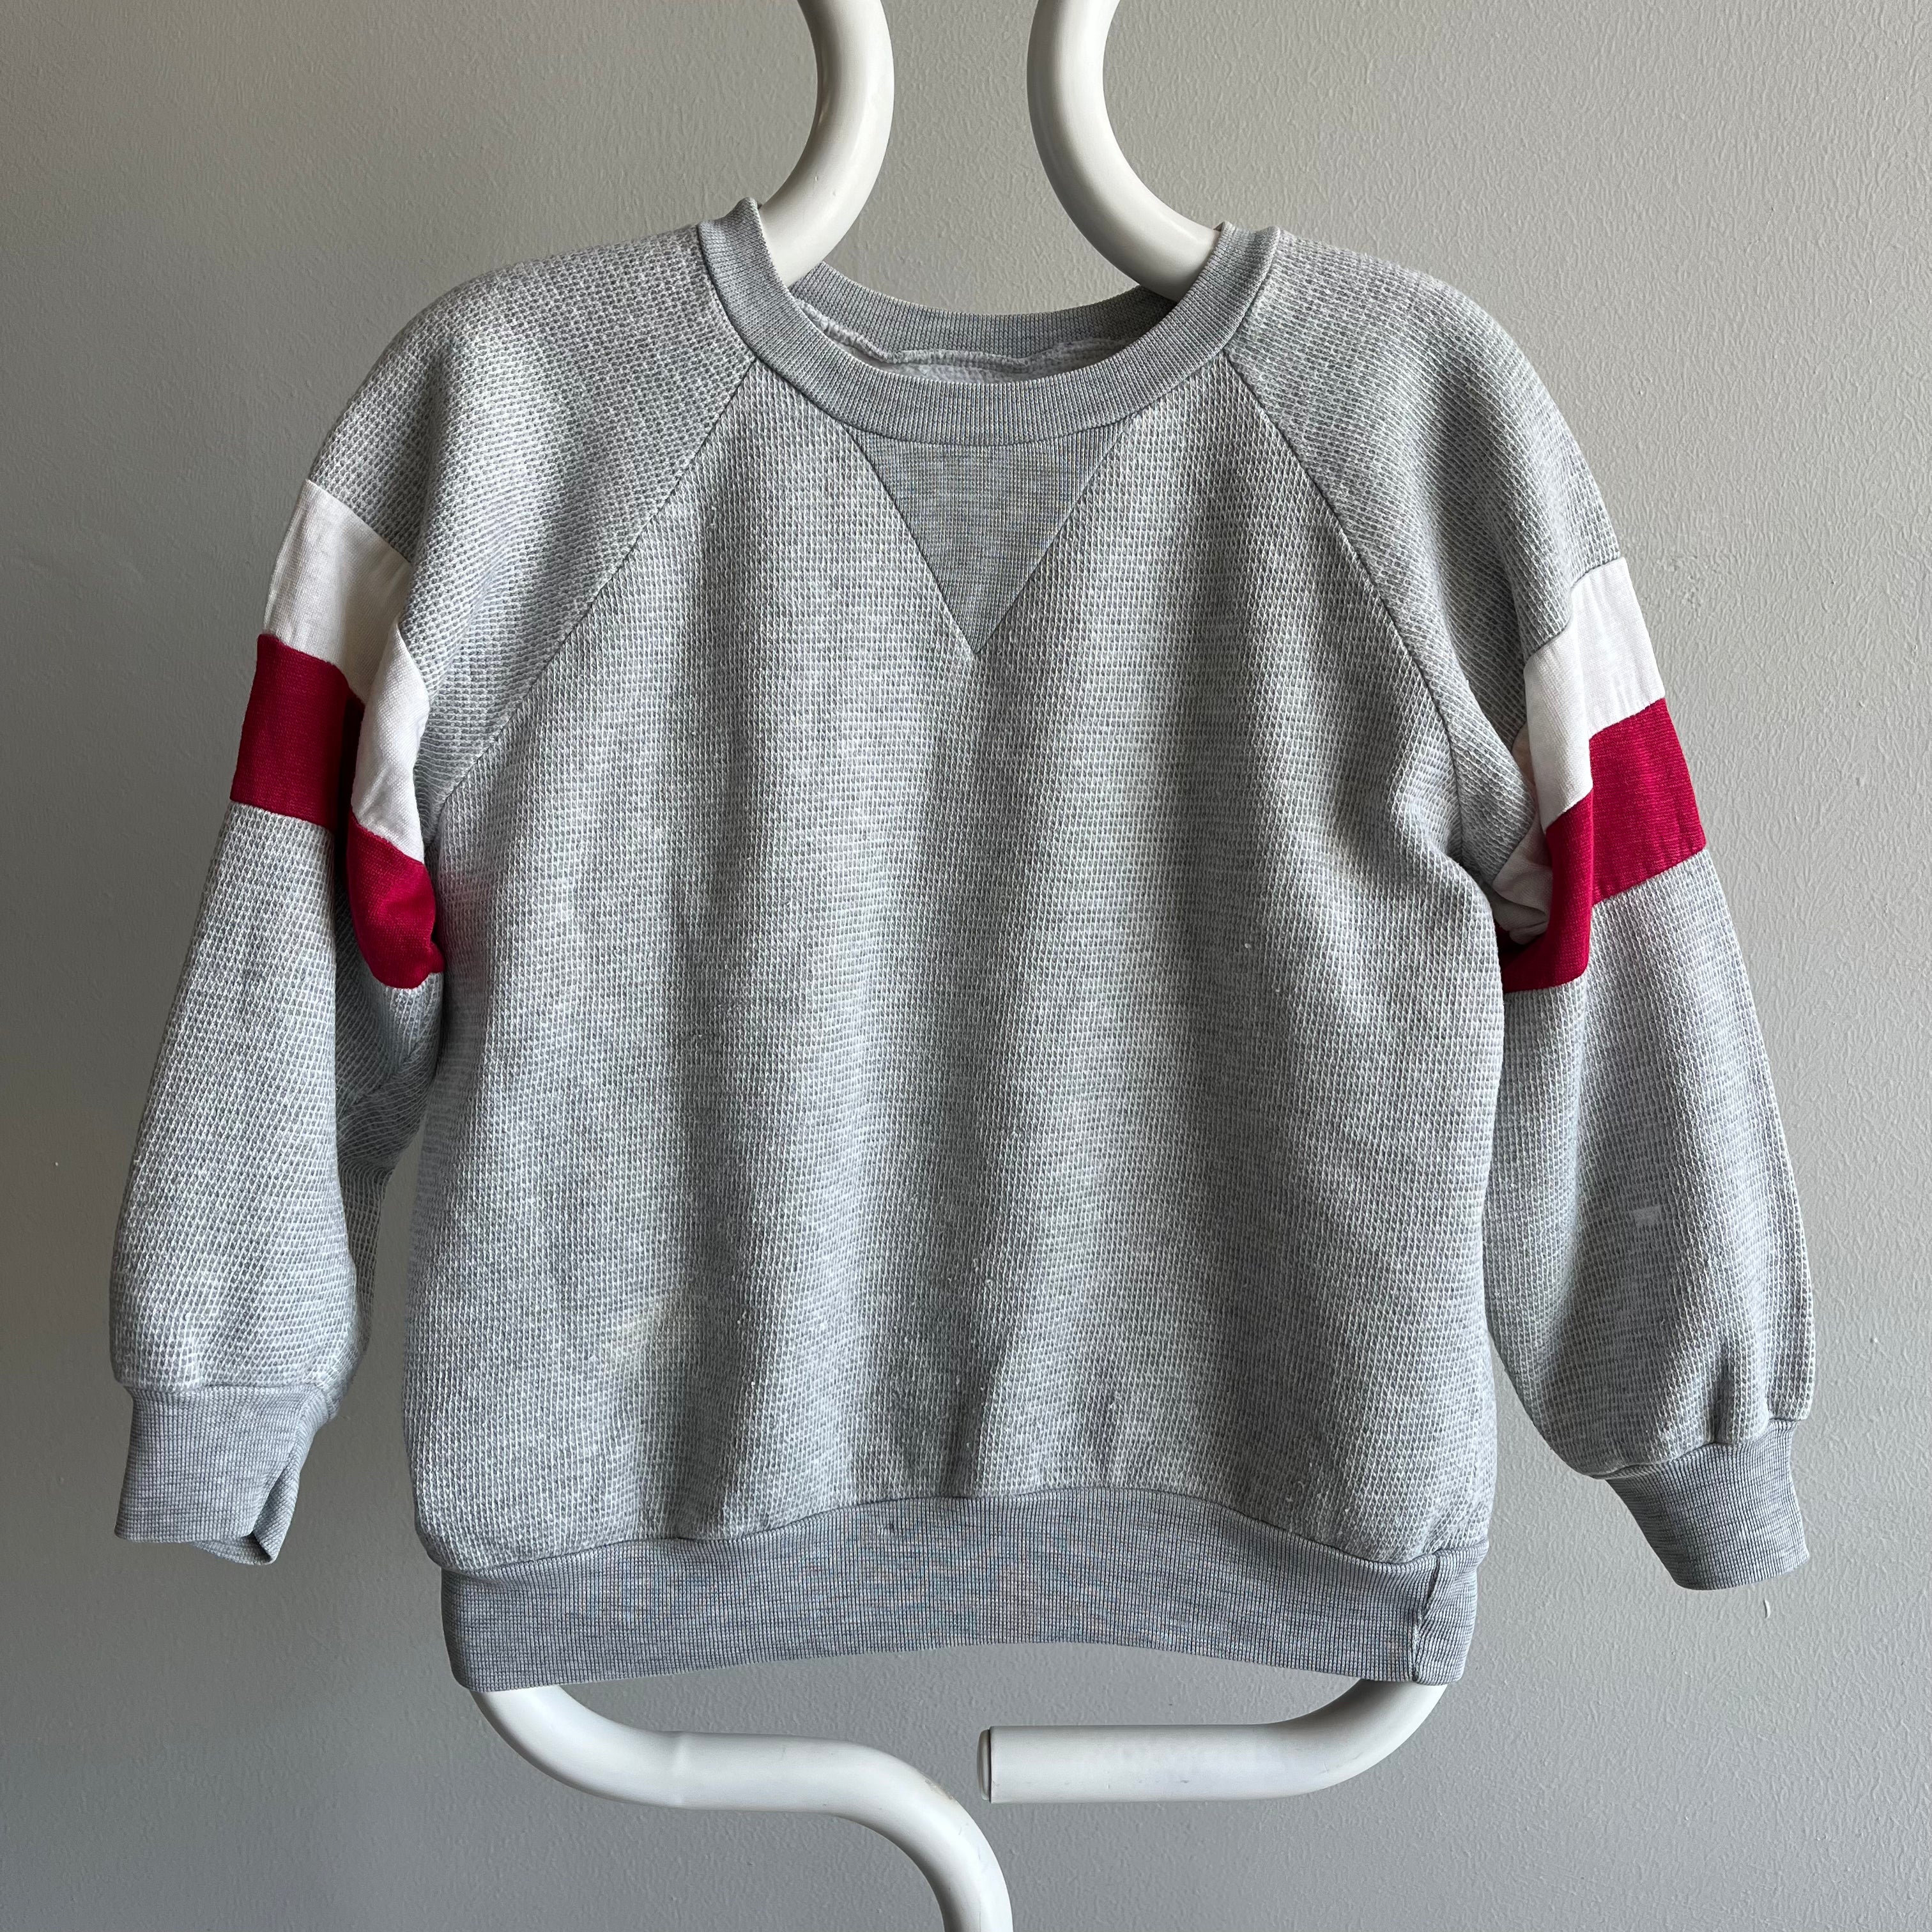 1970s/80s !THIS! Sweatshirt with Pilling and Staining